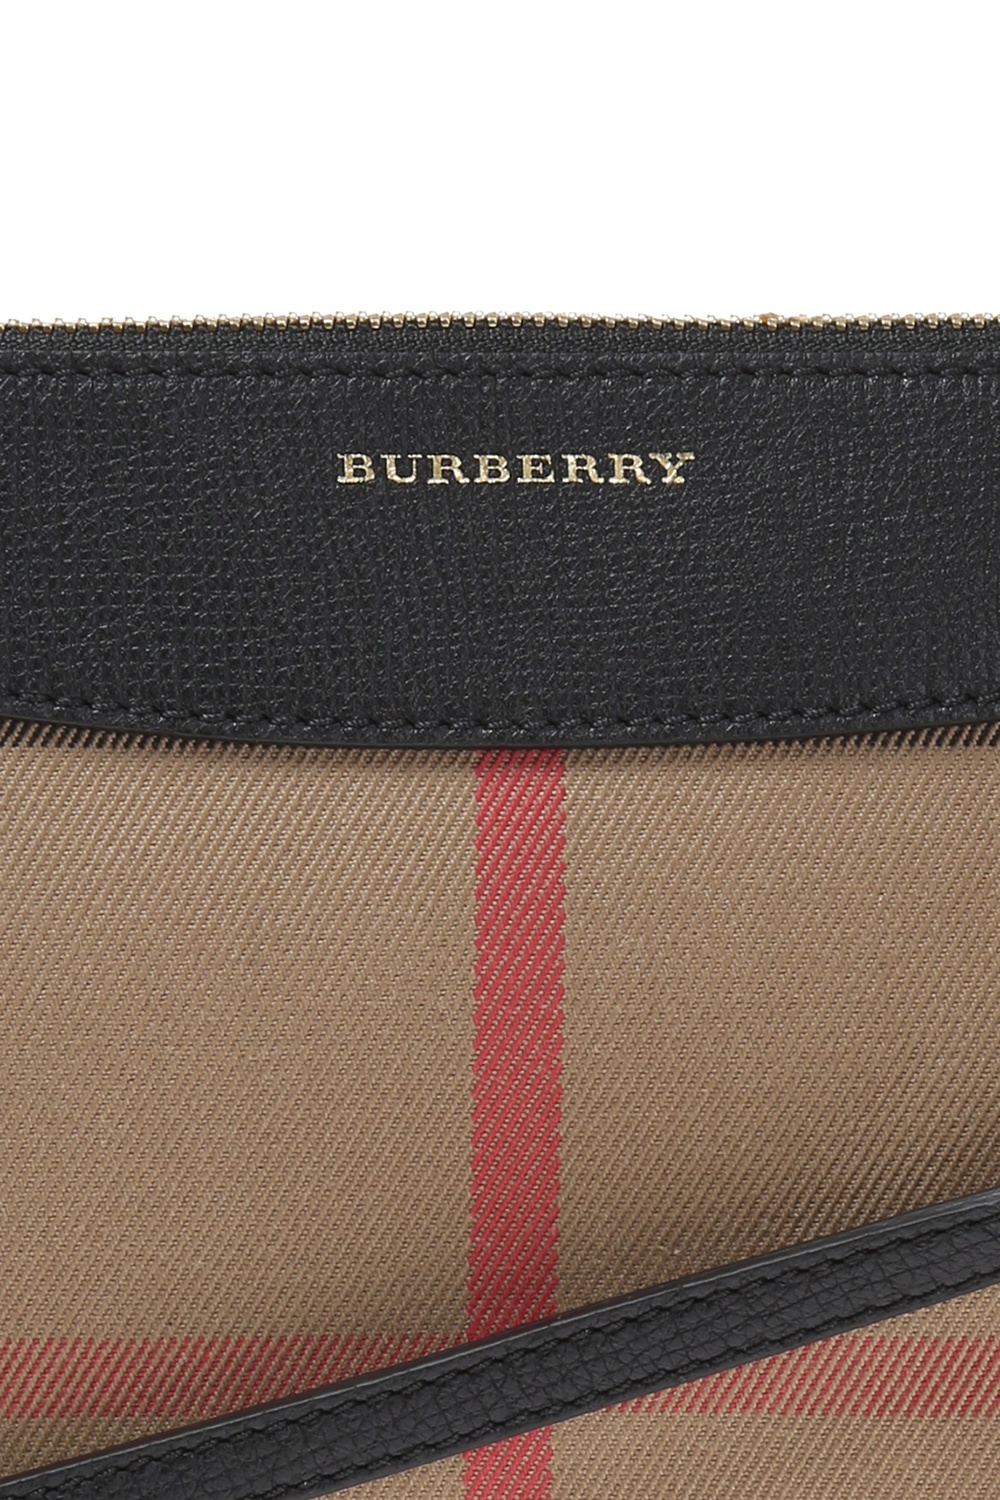 Burberry, Accessories, Mens Burberry Horse Check Leather Belt